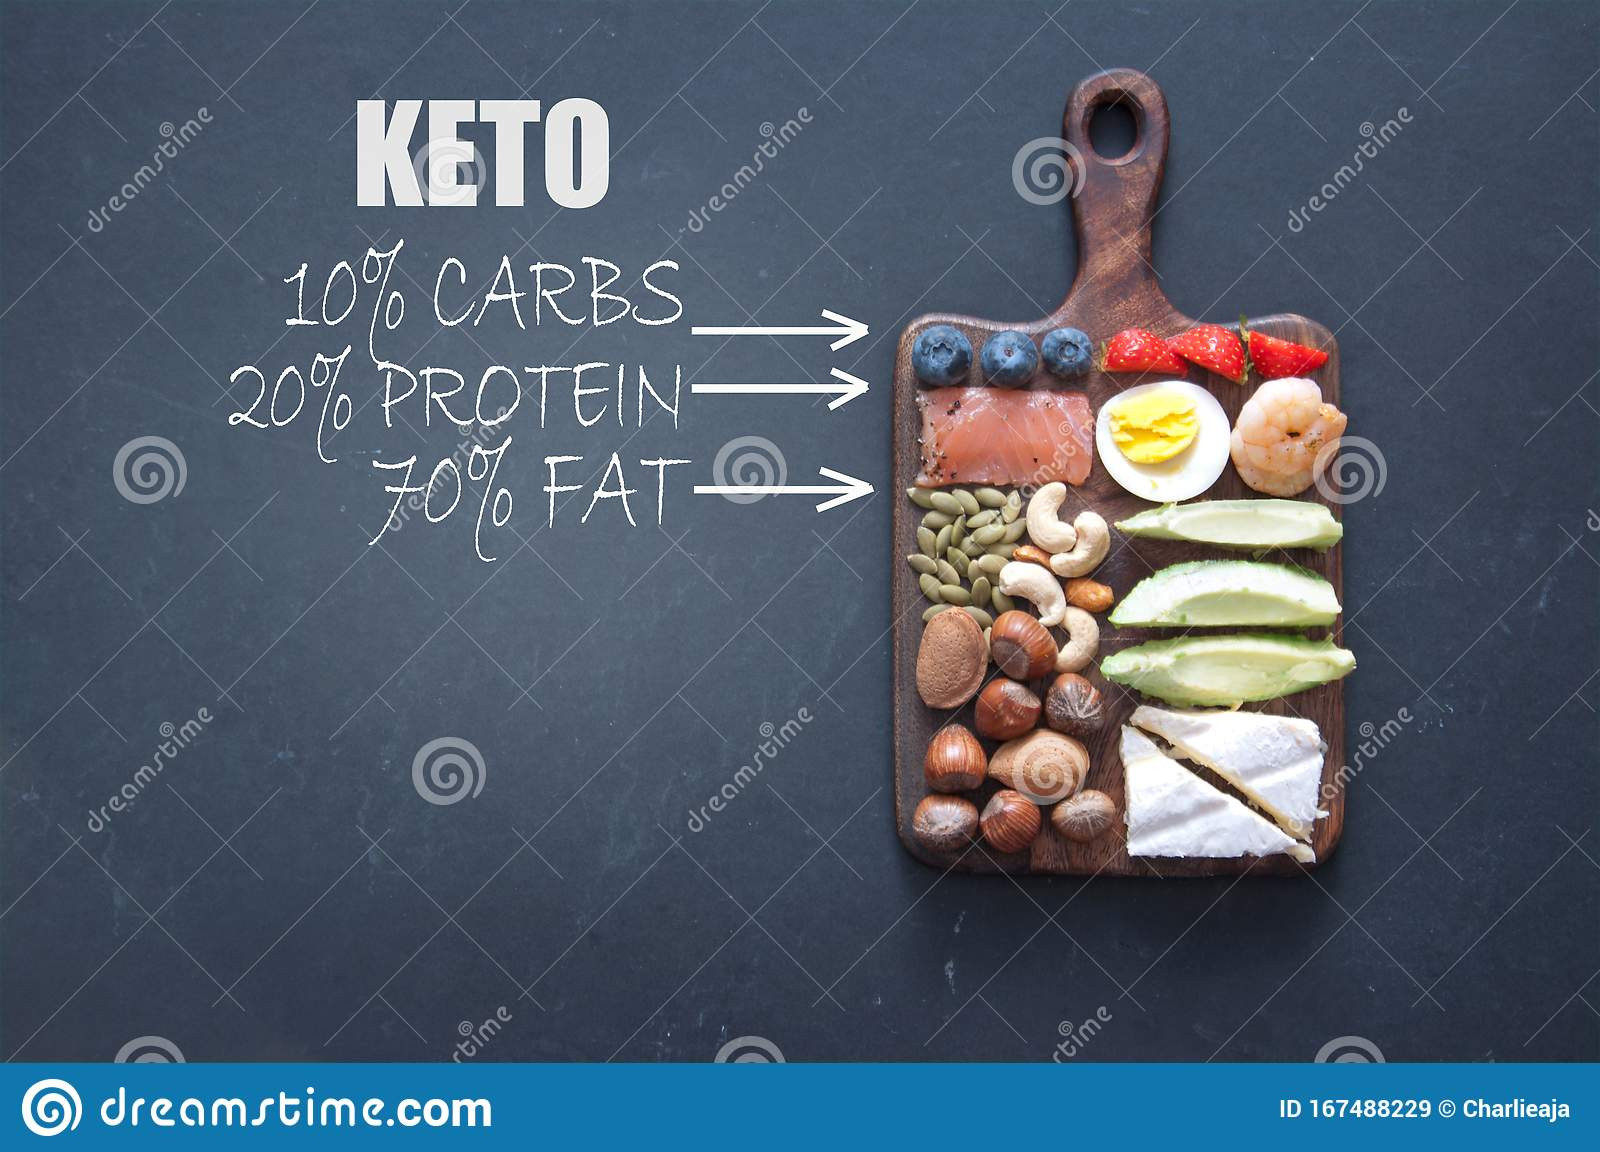 Low Cholesterol Keto Diet
 Keto low carb t foods stock image Image of chopping